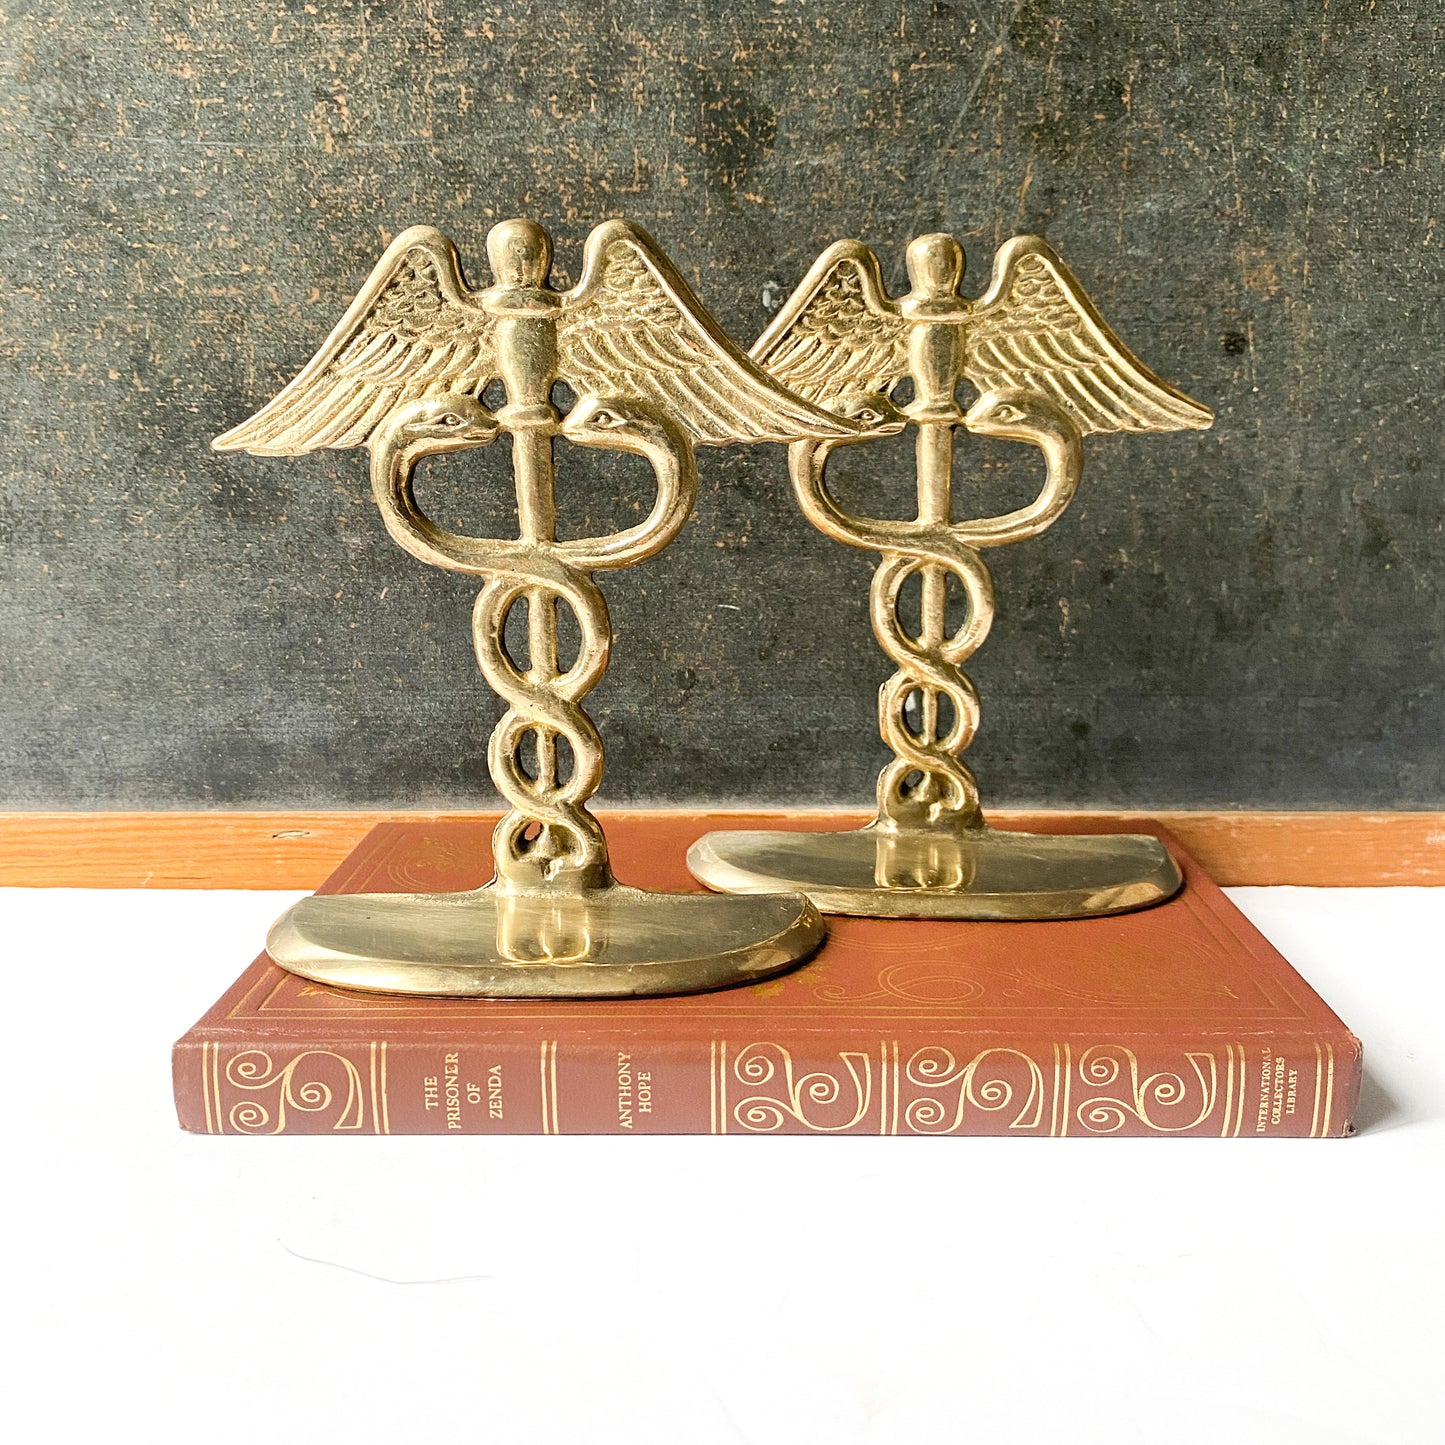 Vintage Brass Caduceus bookends, Intertwined Snake Decor